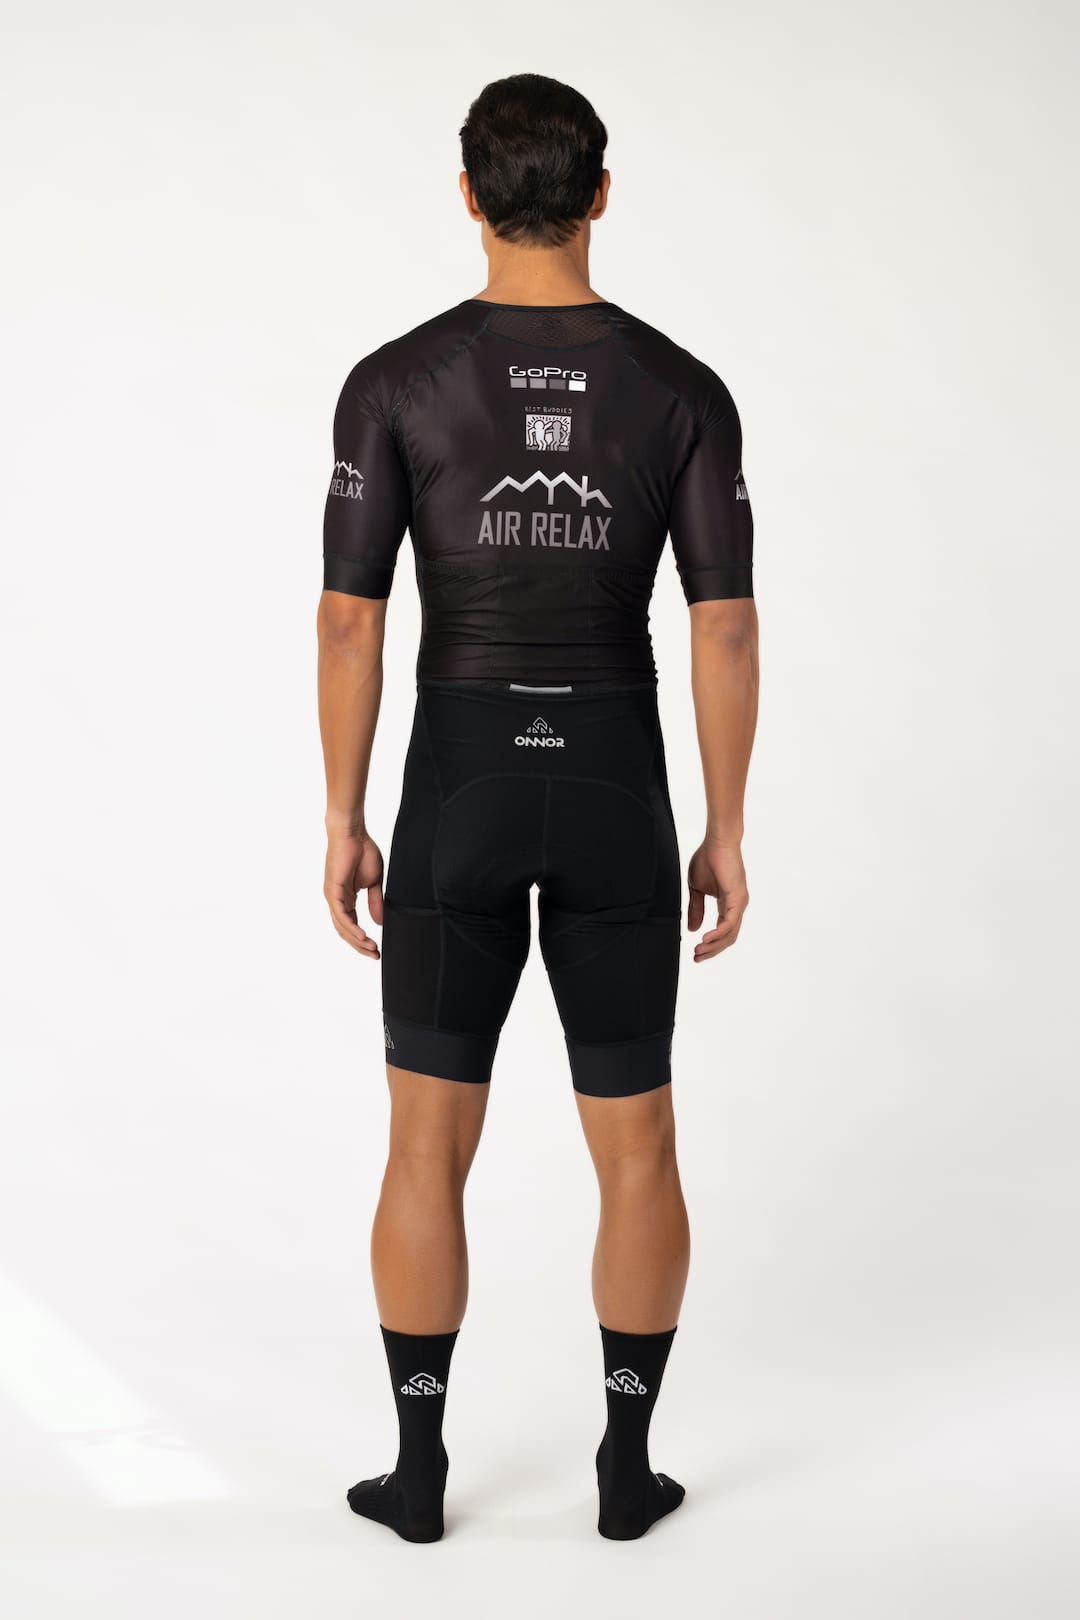 personalized cycling clothing